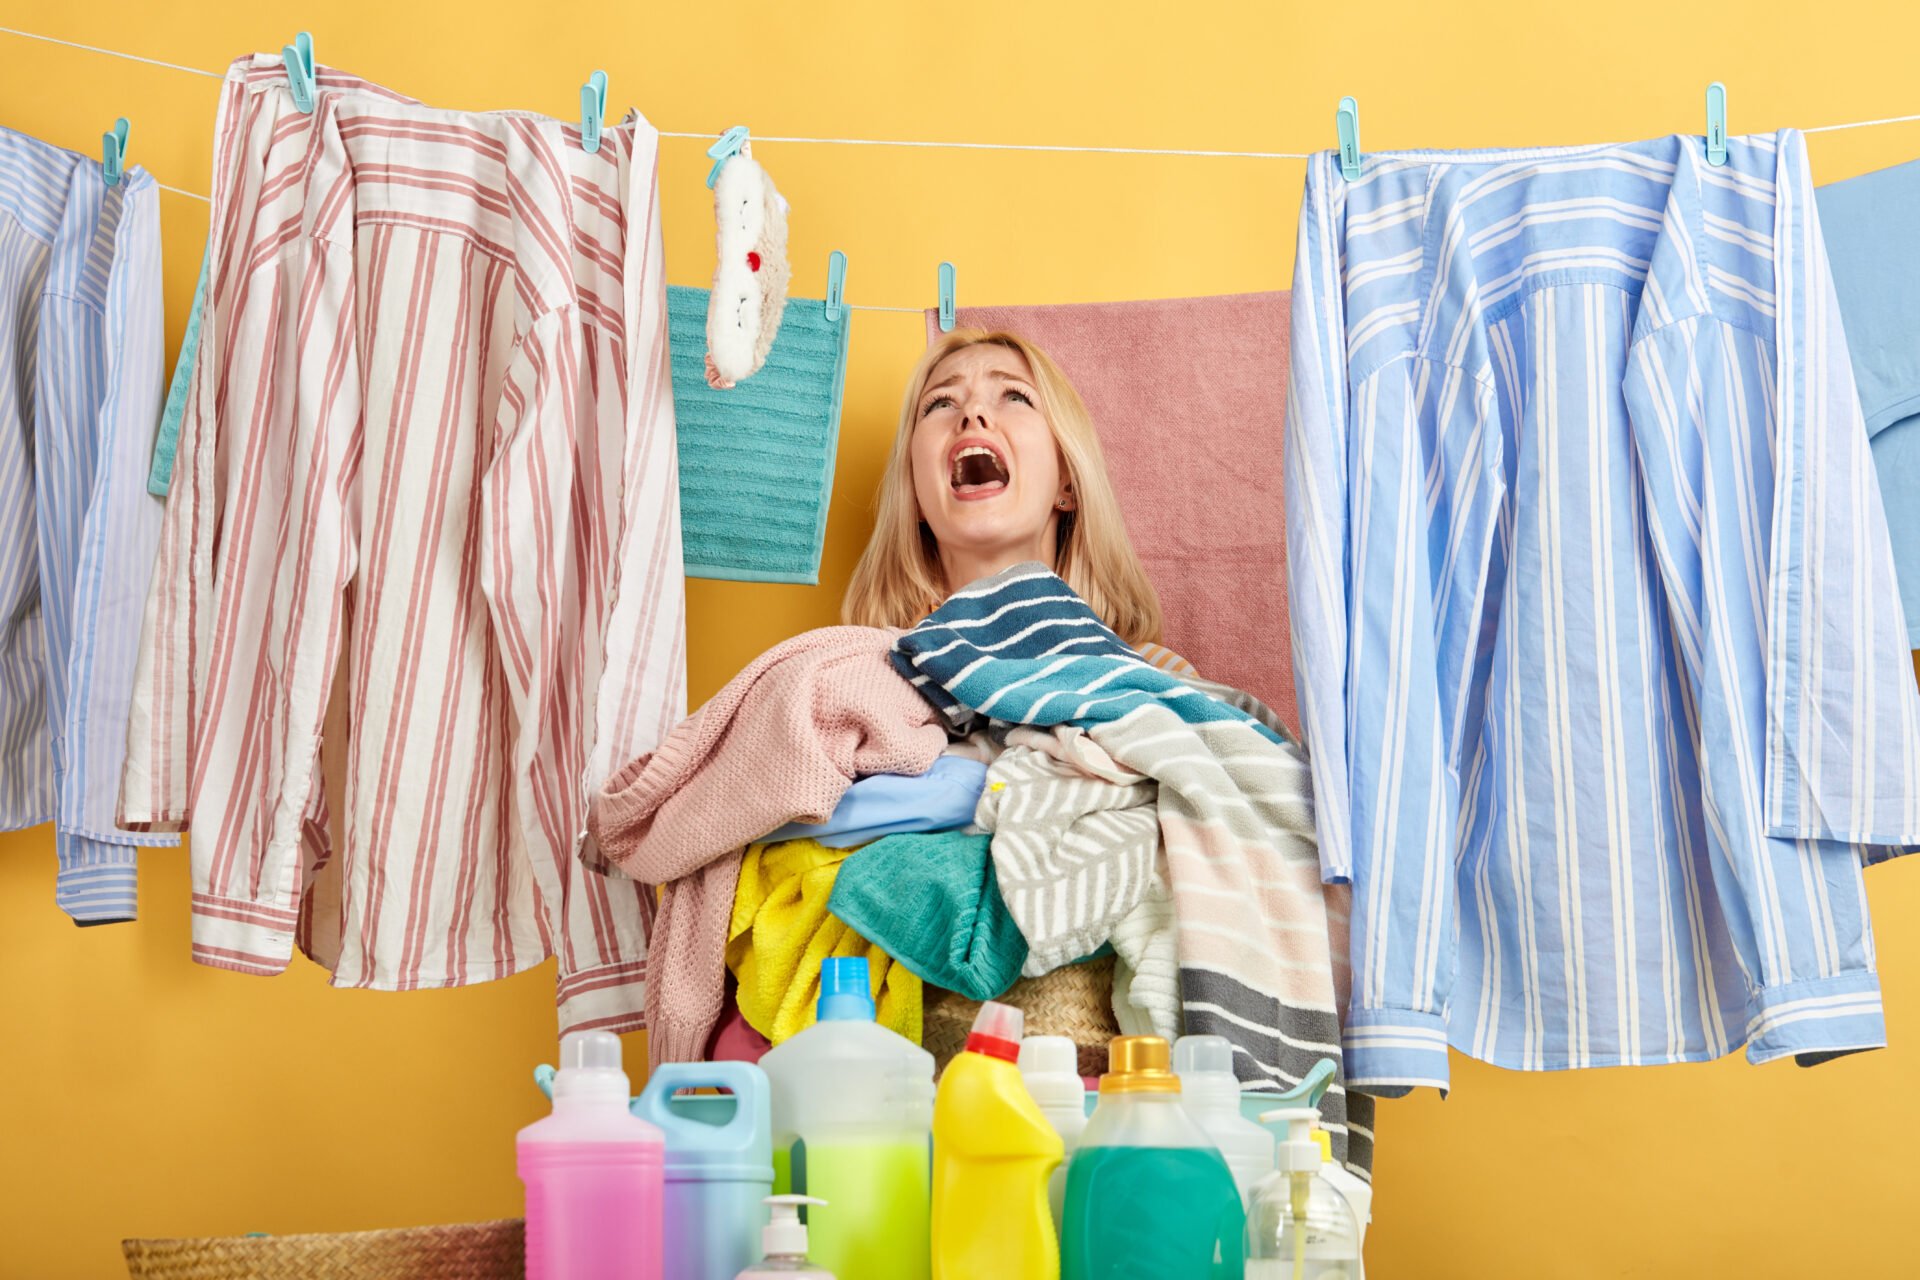 Safest Laundry Detergent Sheets Tested for Indications of PFAS